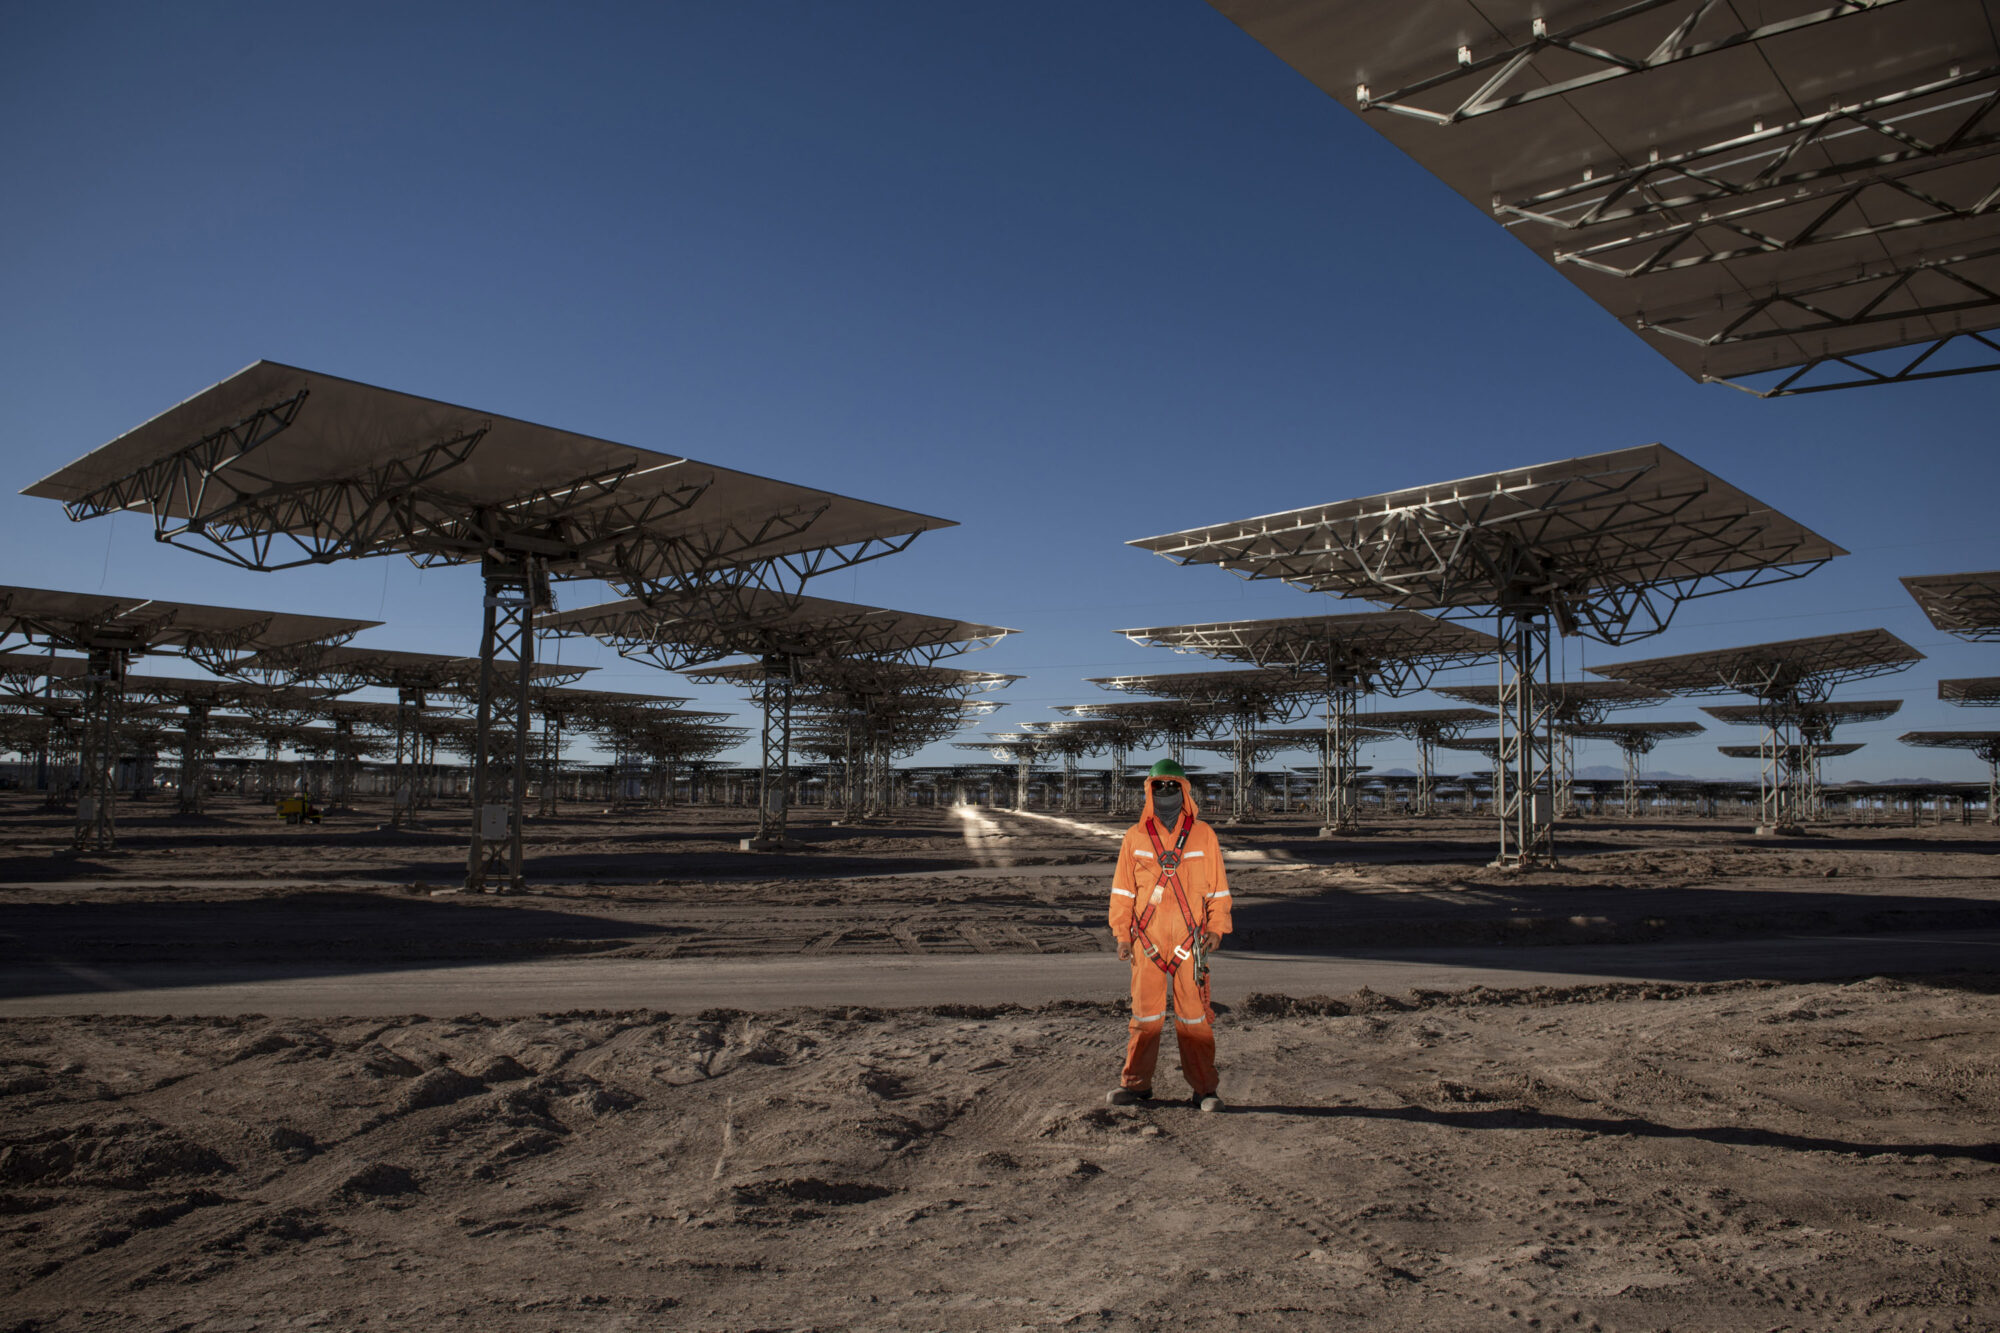 <p>A worker stands in front of heliostats, mirrors used to concentrate solar energy, at the Cerro Dominador solar power plant in the Atacama Desert, Chile (Image: <a href="https://flickr.com/photos/imfphoto/51310626415/">Tamara Merino</a> / <a href="https://flickr.com/photos/imfphoto/">International Monetary Fund</a>, <a href="https://creativecommons.org/licenses/by-nc-nd/2.0/">CC BY-NC-ND</a>)</p>